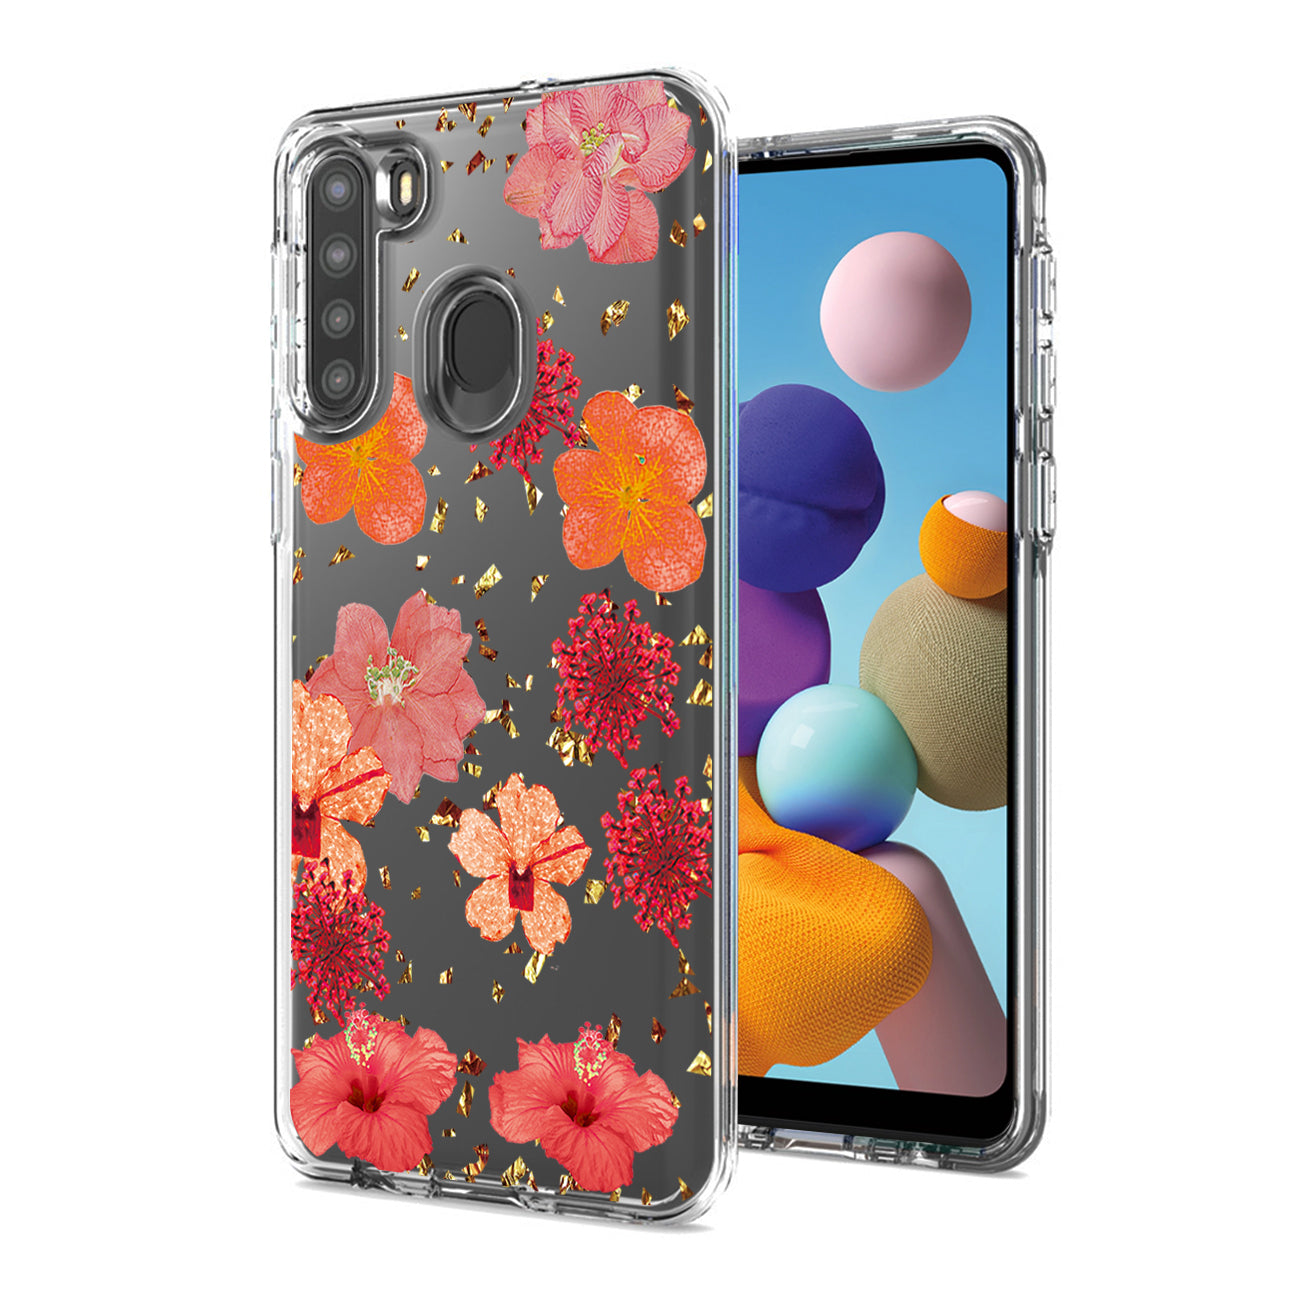 Pressed dried flower Design Phone case for SAMSUNG GALAXY A21 in Red